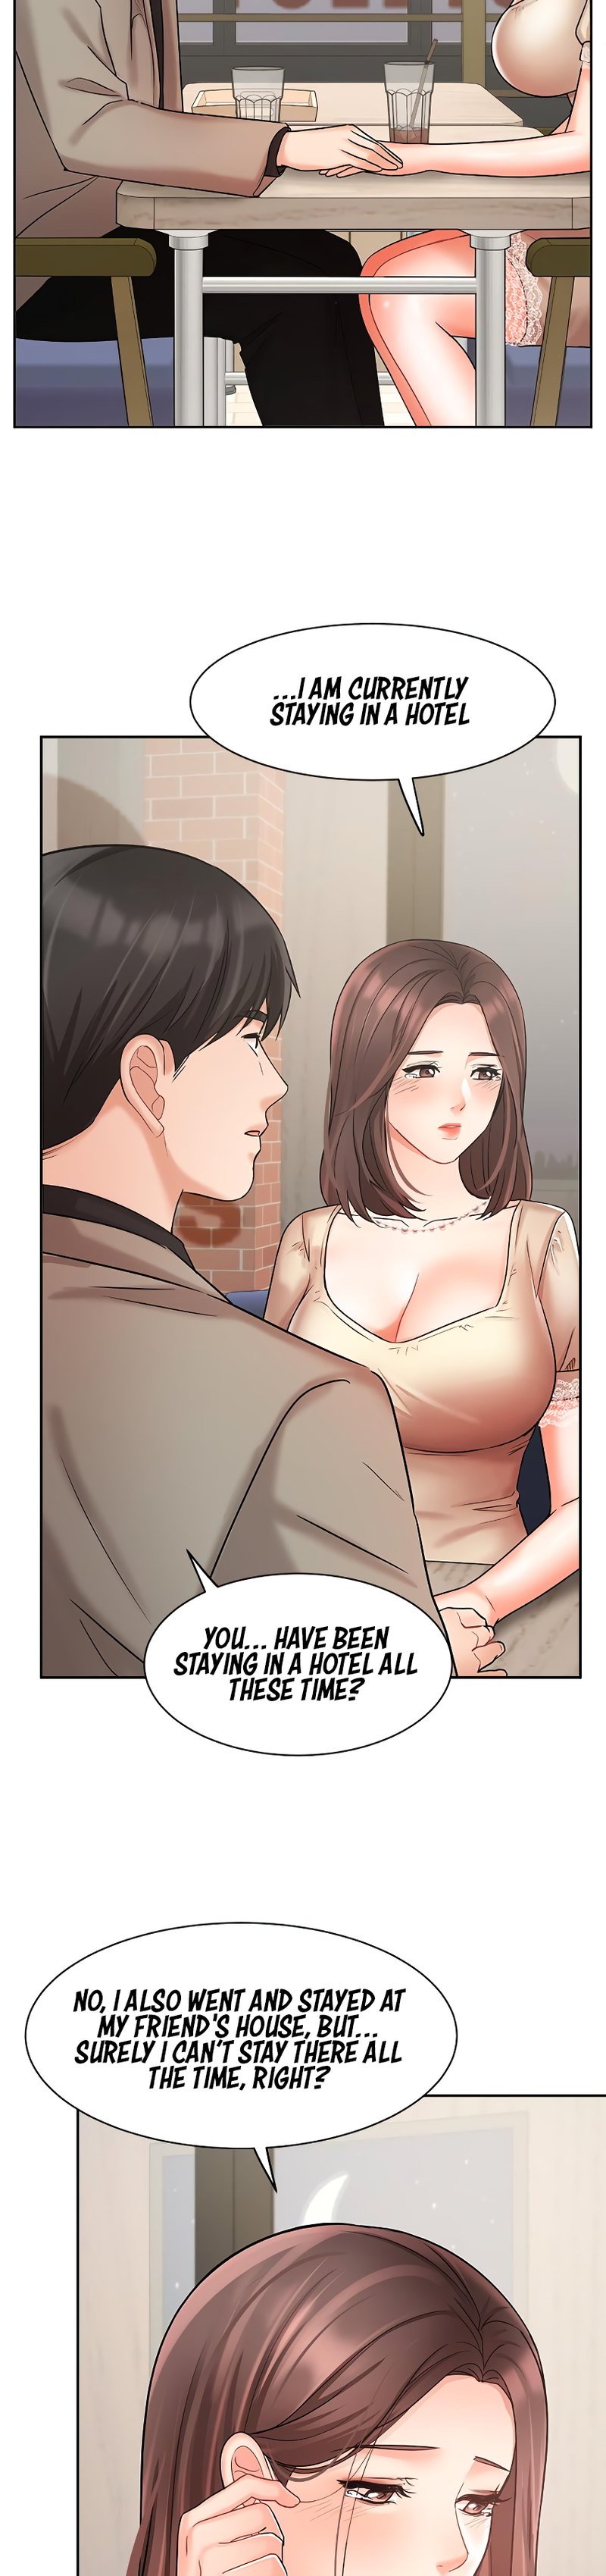 sold-out-girl-chap-34-20